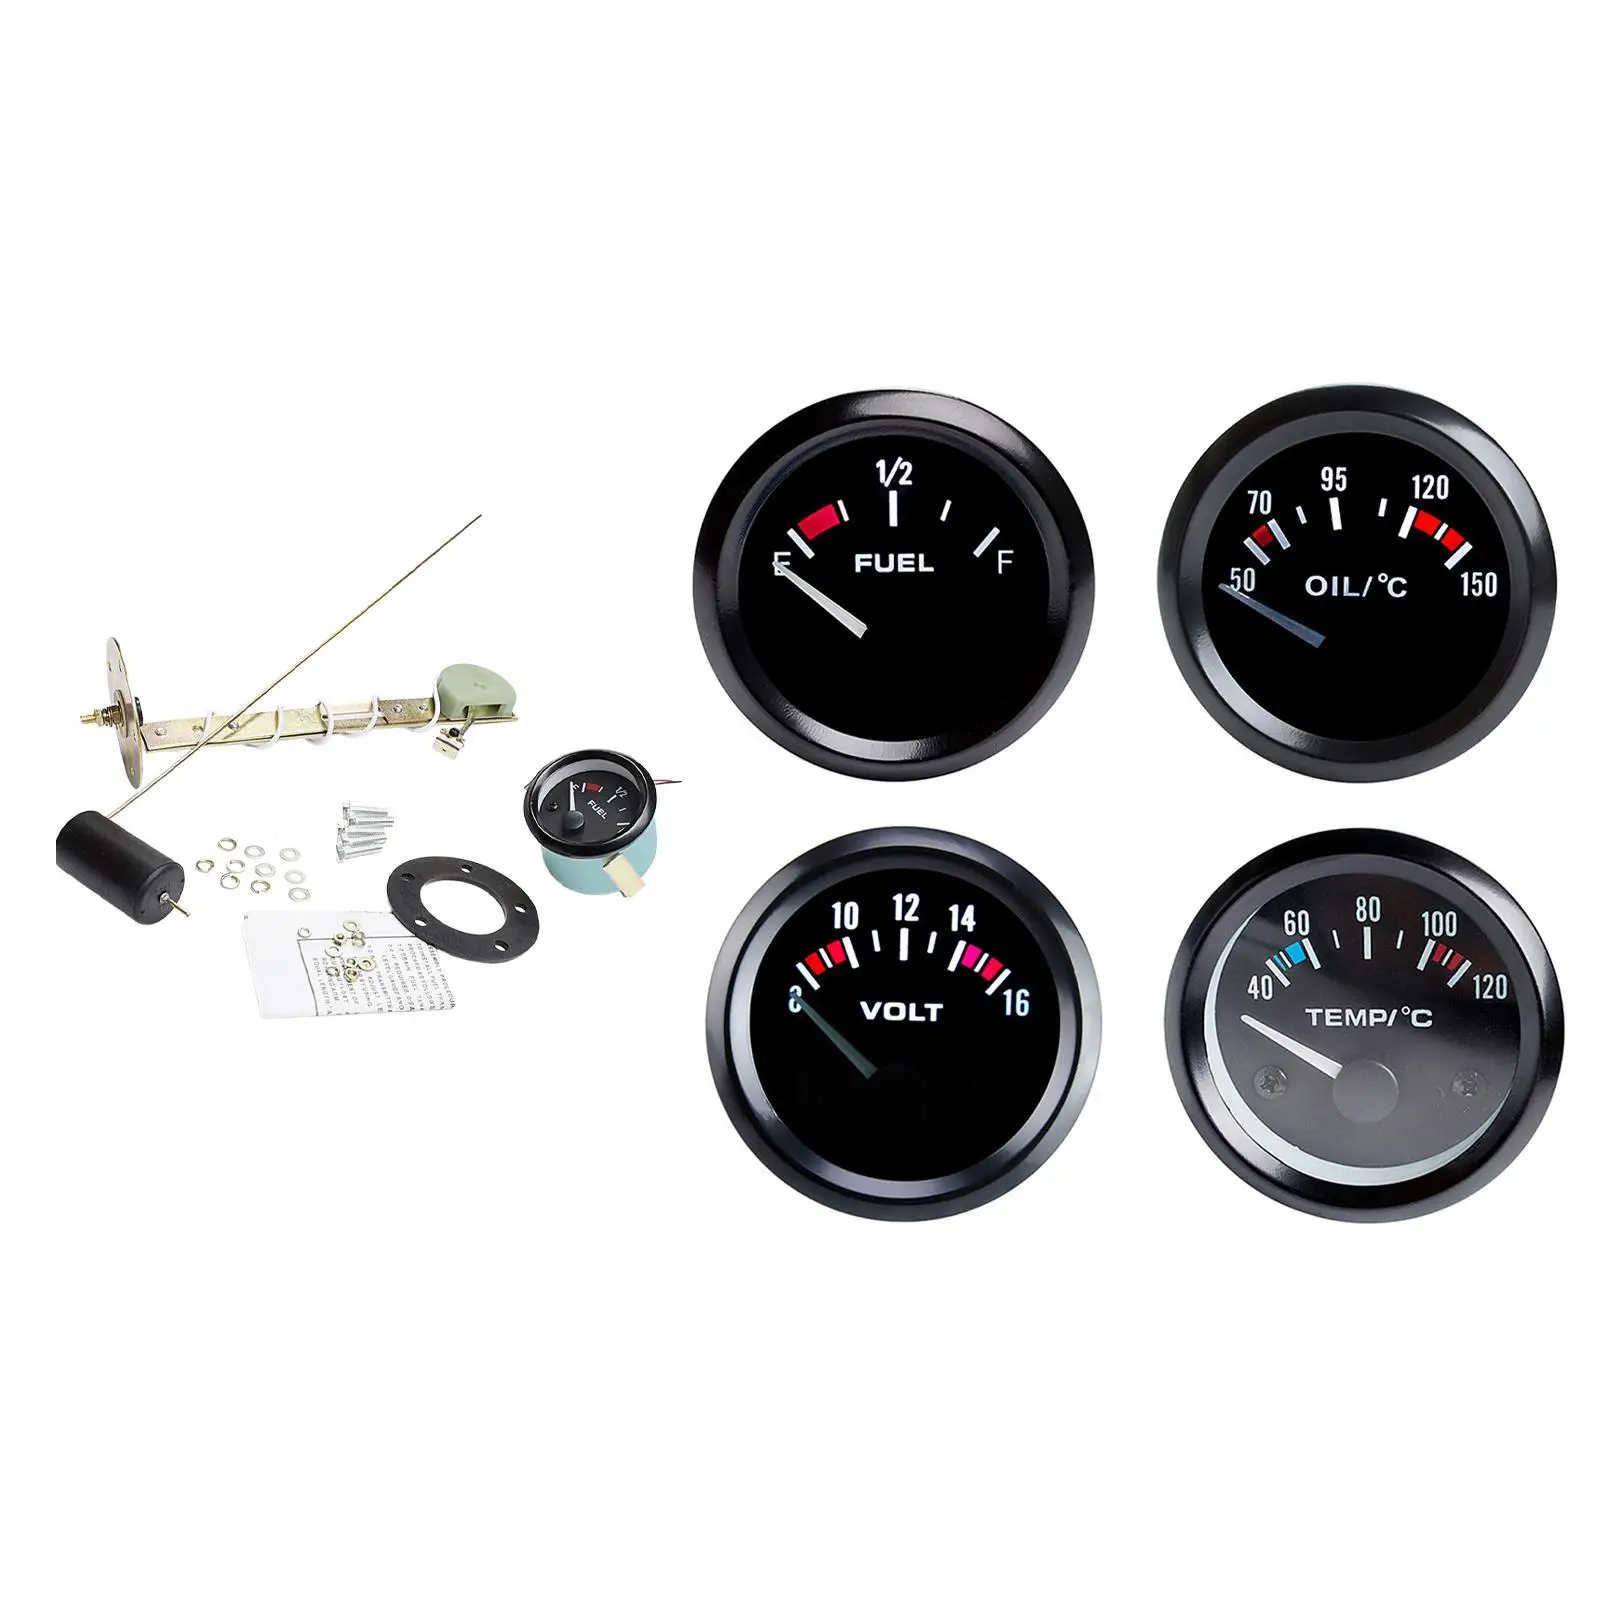 Car Fuel Gauge Adjustable LED Display Racing Instrument Panel 52mm 2 inch for Replaces Premium Car Accessories Spare Parts